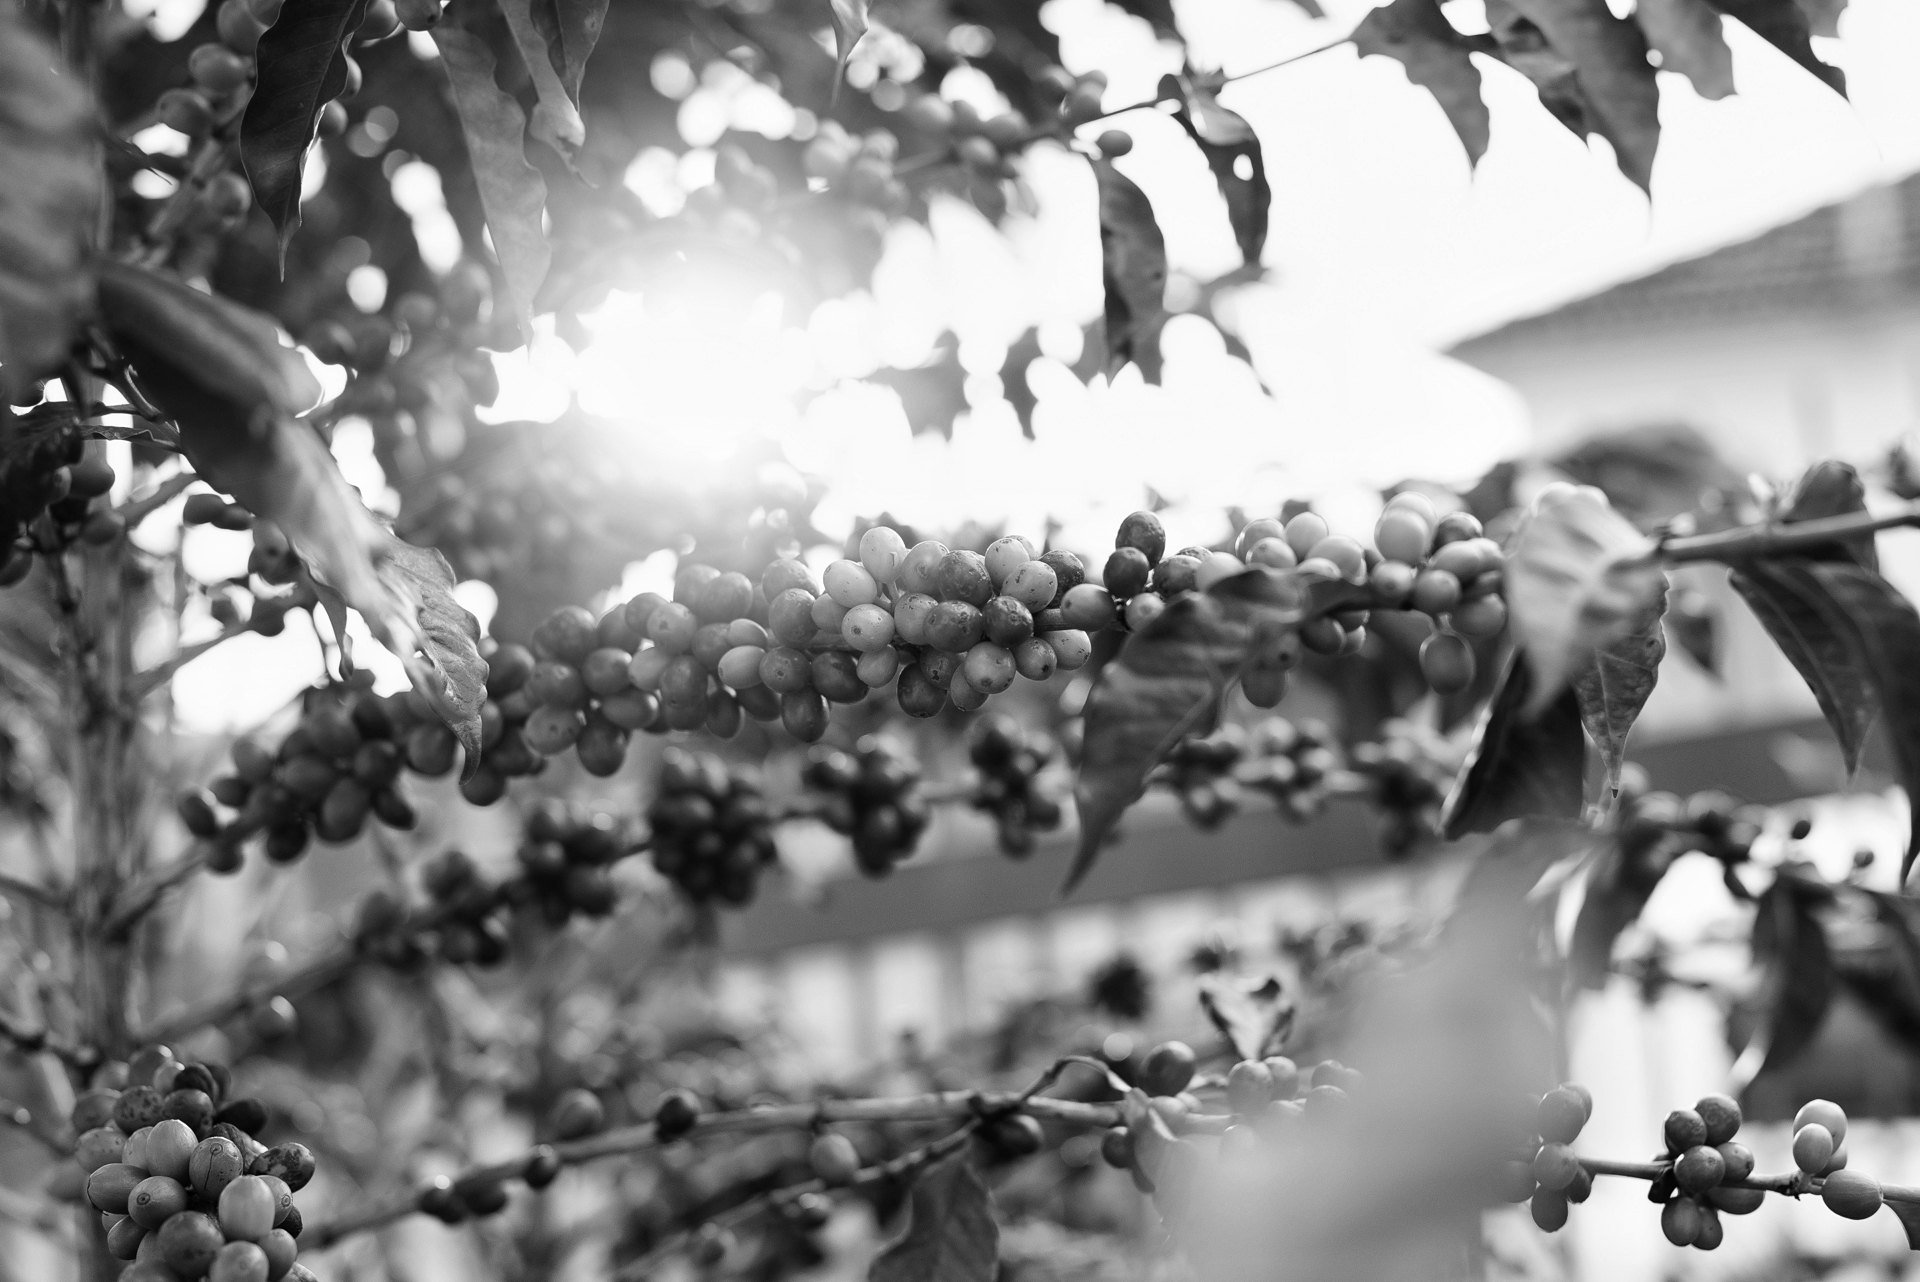 Coffee cherries ripening on a branch, backlit by the sun